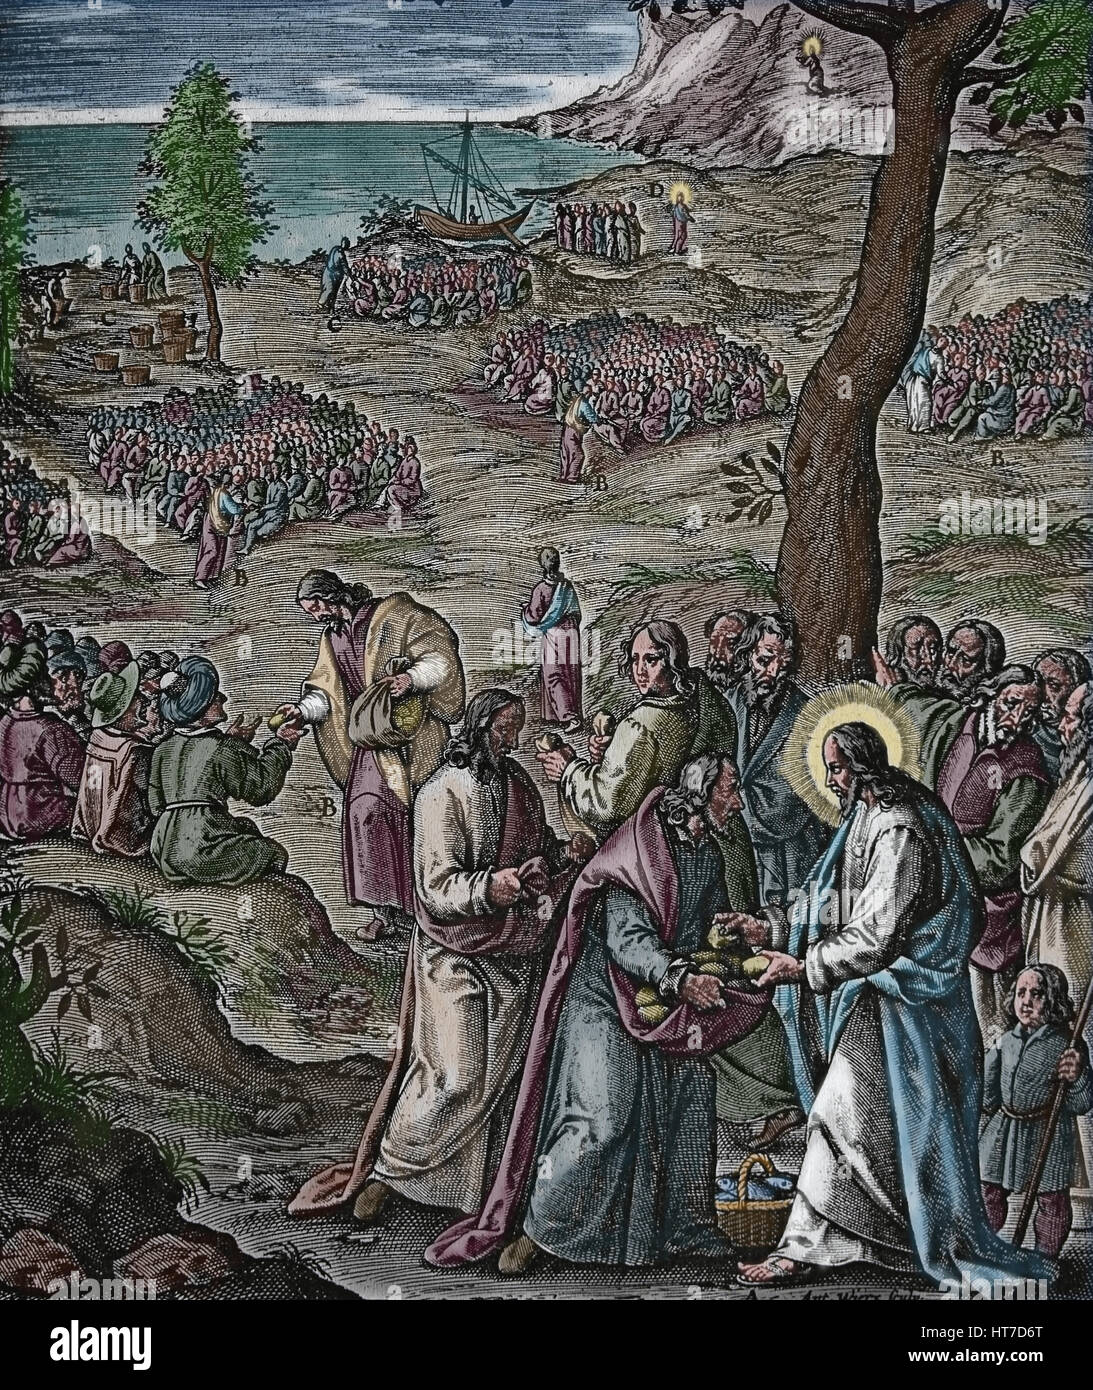 Jesus feeds 5000 peoples. Miracle of the five loaves and two fish. Gospel Illustration by Jerome Nadal (1507-1580). Engraving later colouration. Stock Photo